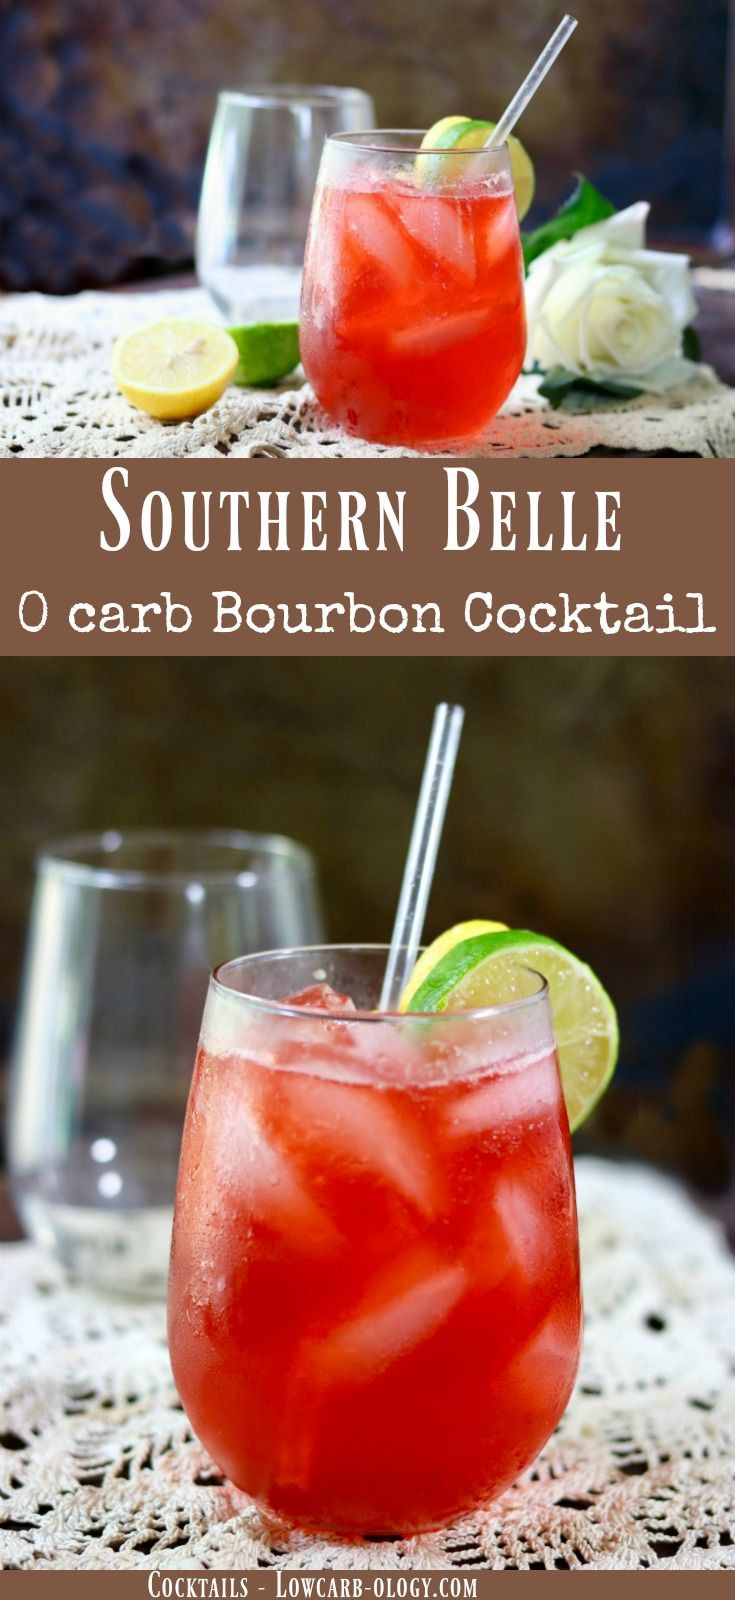 Low Carb Bourbon Drinks
 Summer Bourbon Cocktail The Southern Belle lowcarb ology